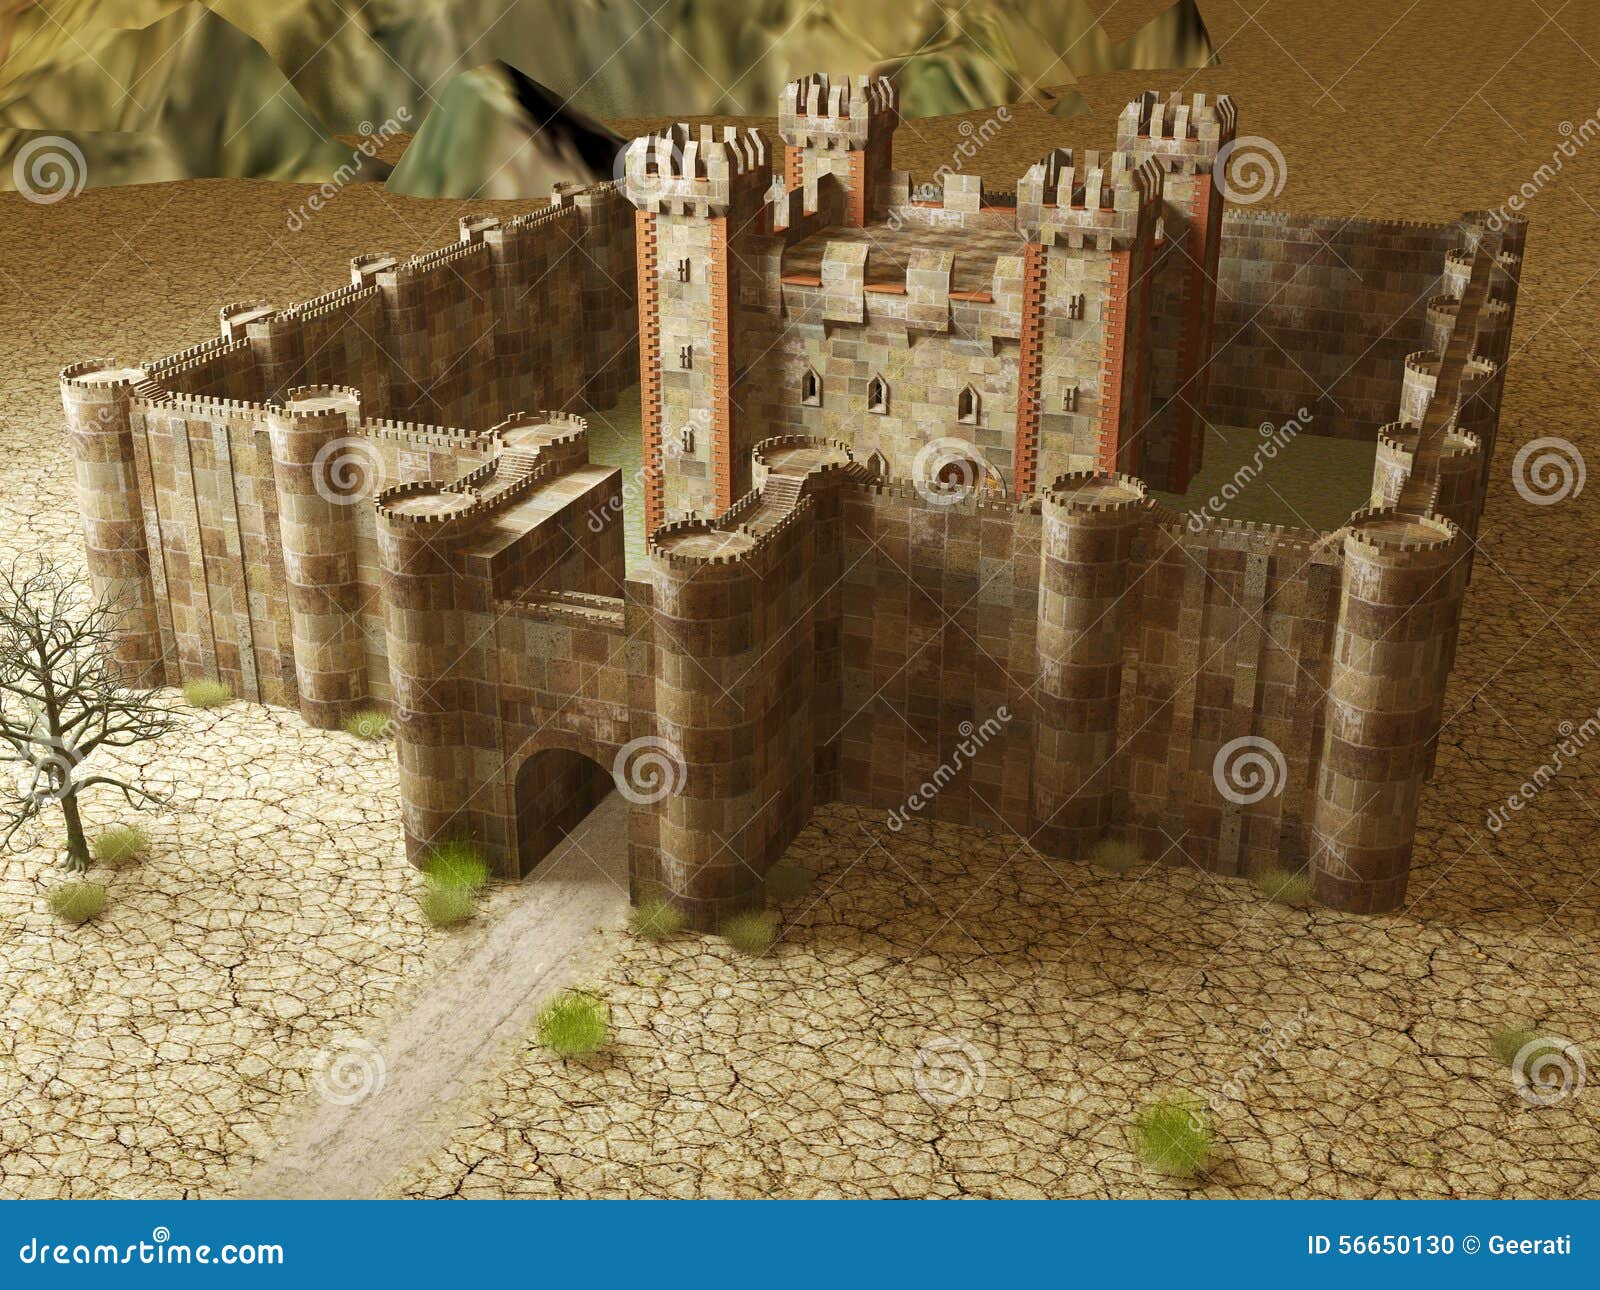 medieval stronghold